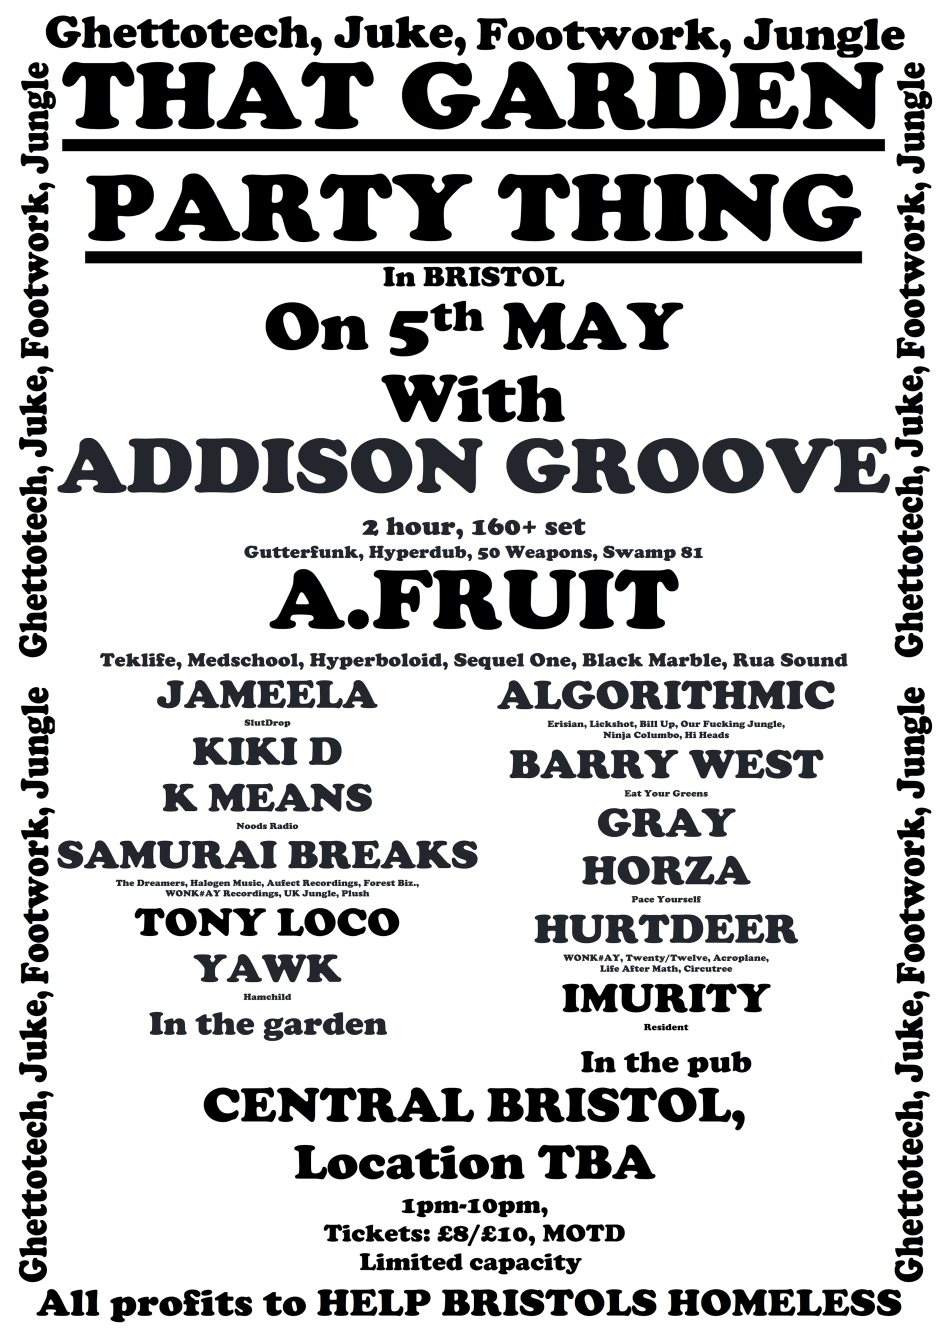 That Garden Party Things with Addison Groove and A. Fruit - Página frontal